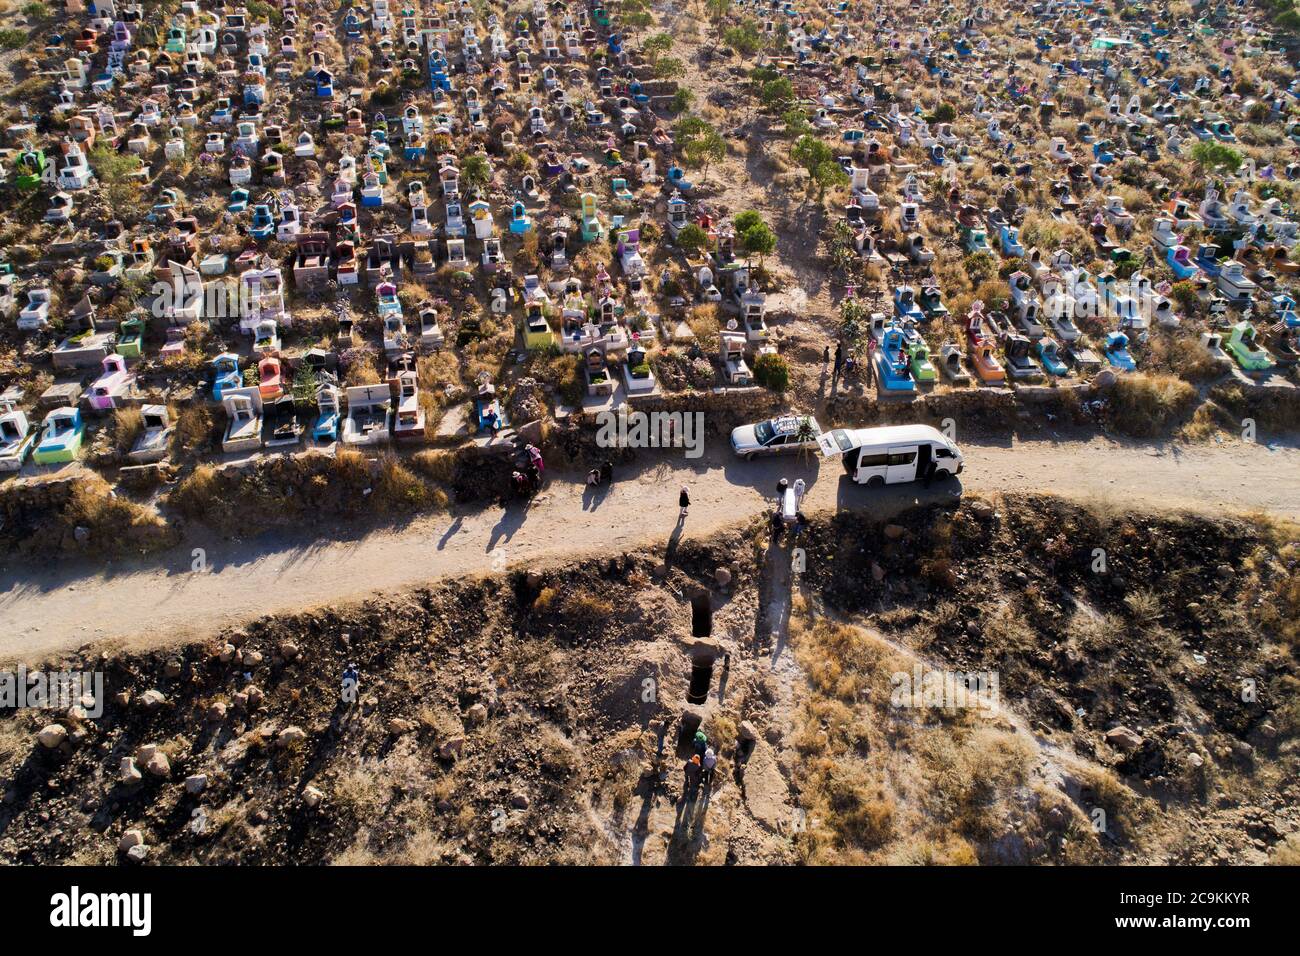 Arequipa, Peru. 31st July, 2020. Cemetery staff and relatives come to a funeral at the El Cebaollar cemetery in the middle of the Corona pandemic. As of July 28, Peru had confirmed 400,638 Covid-19 cases with a mortality rate of 4.71 percent. Credit: Denis Mayhua/dpa/Alamy Live News Stock Photo